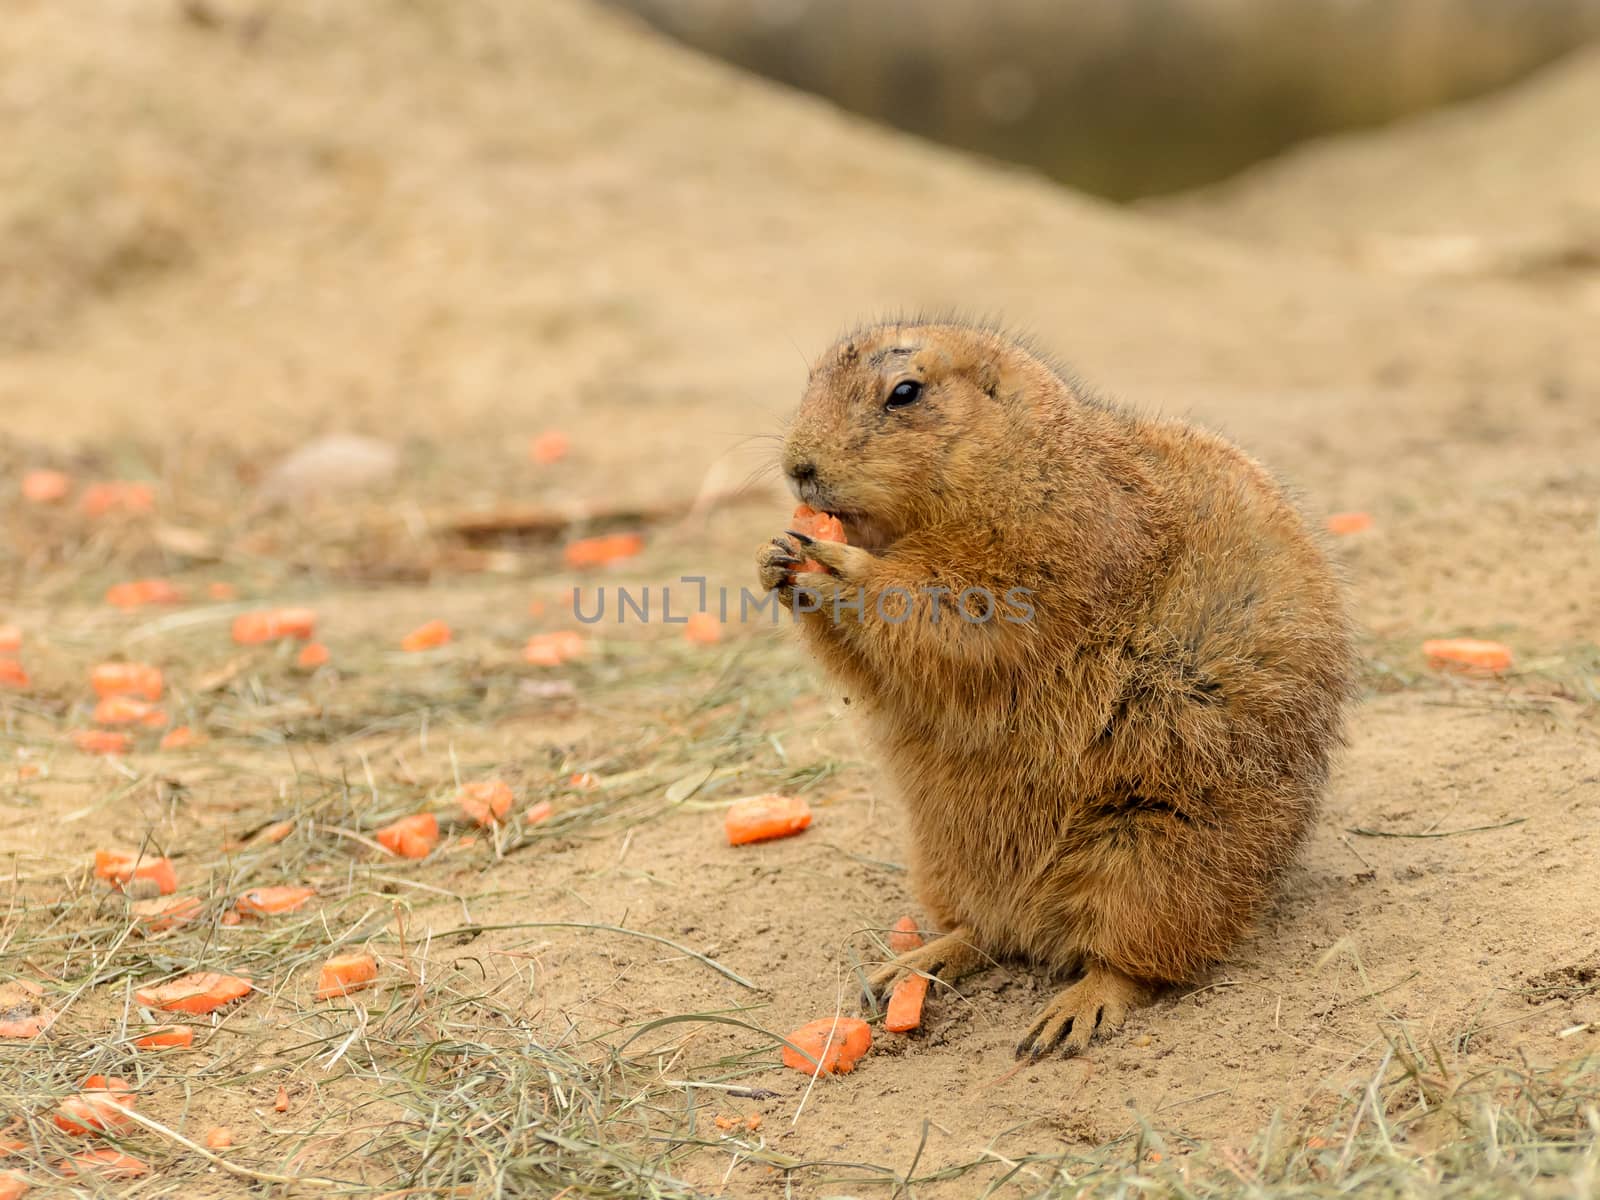 Closeup shot of this animal that looks like a beaver eating pieces of carrot